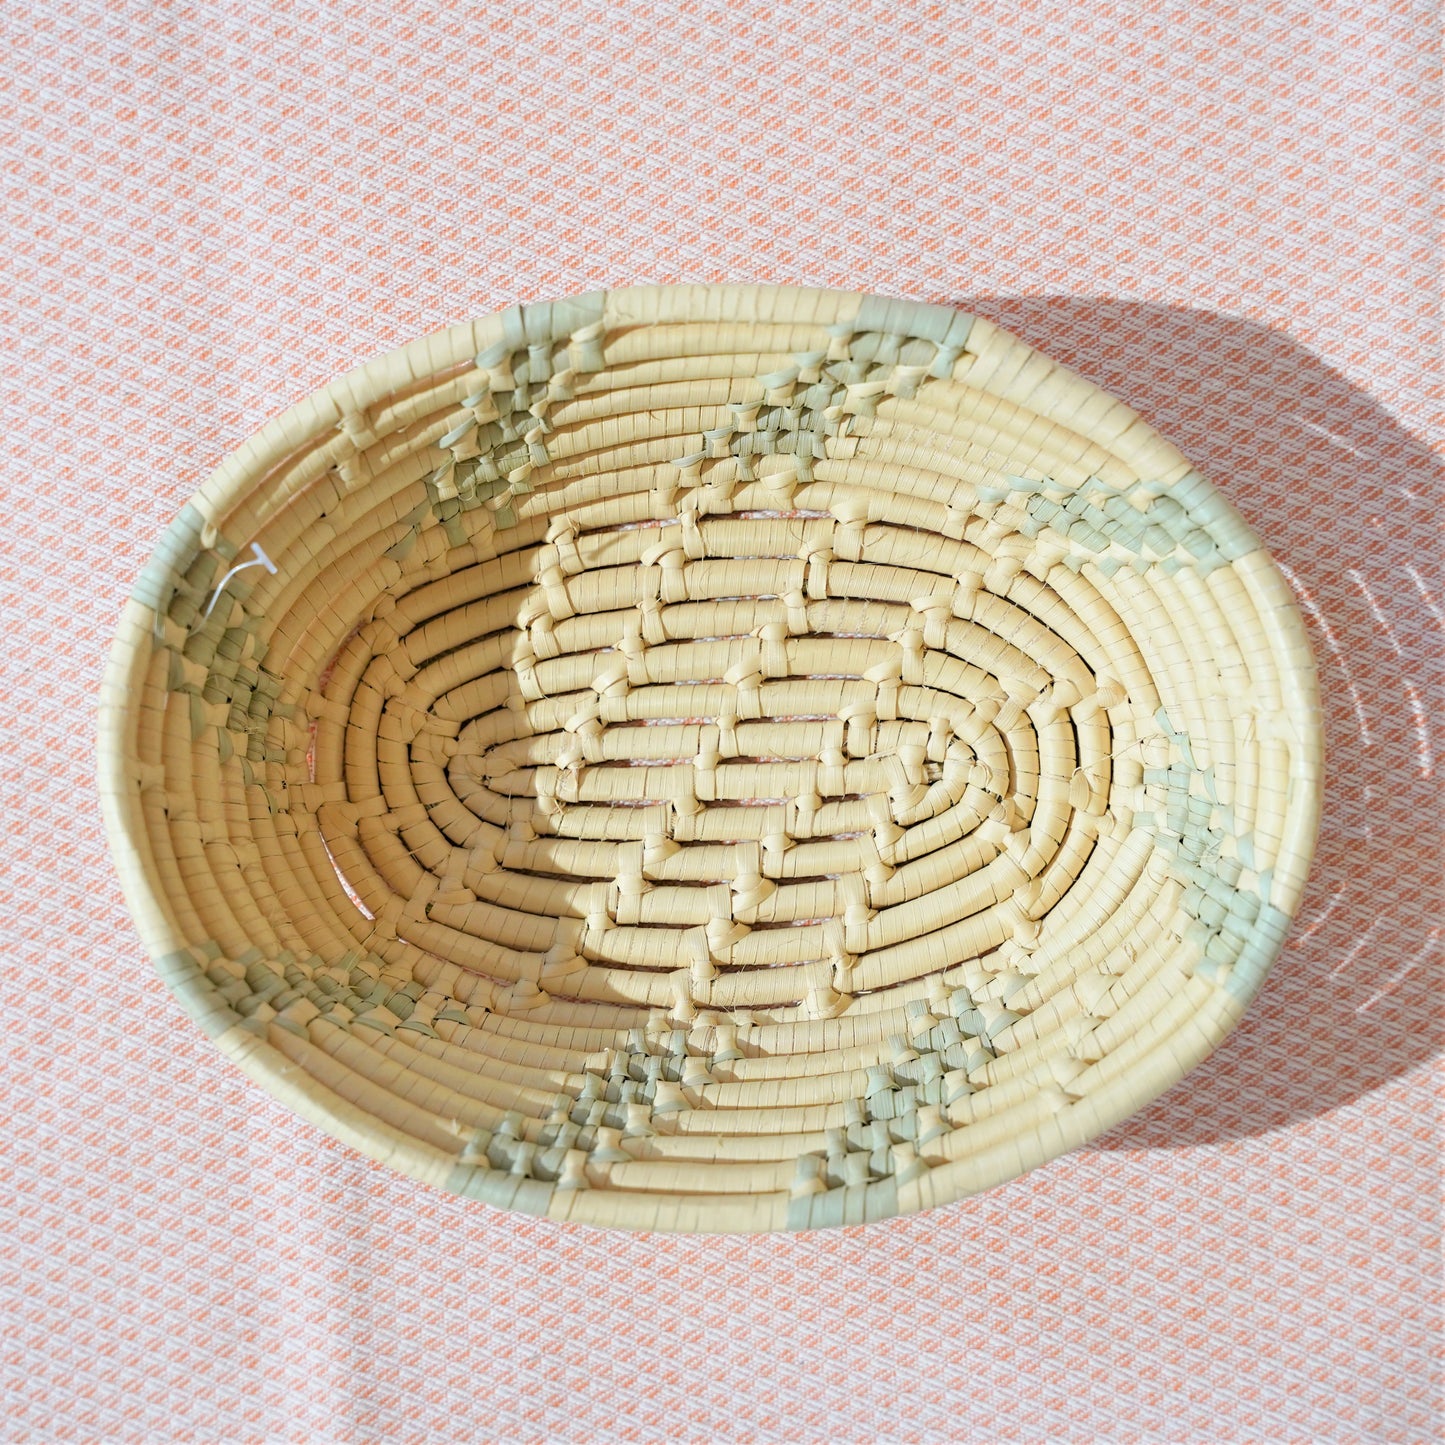 2nd Story Goods: Small Oval Sorting Basket